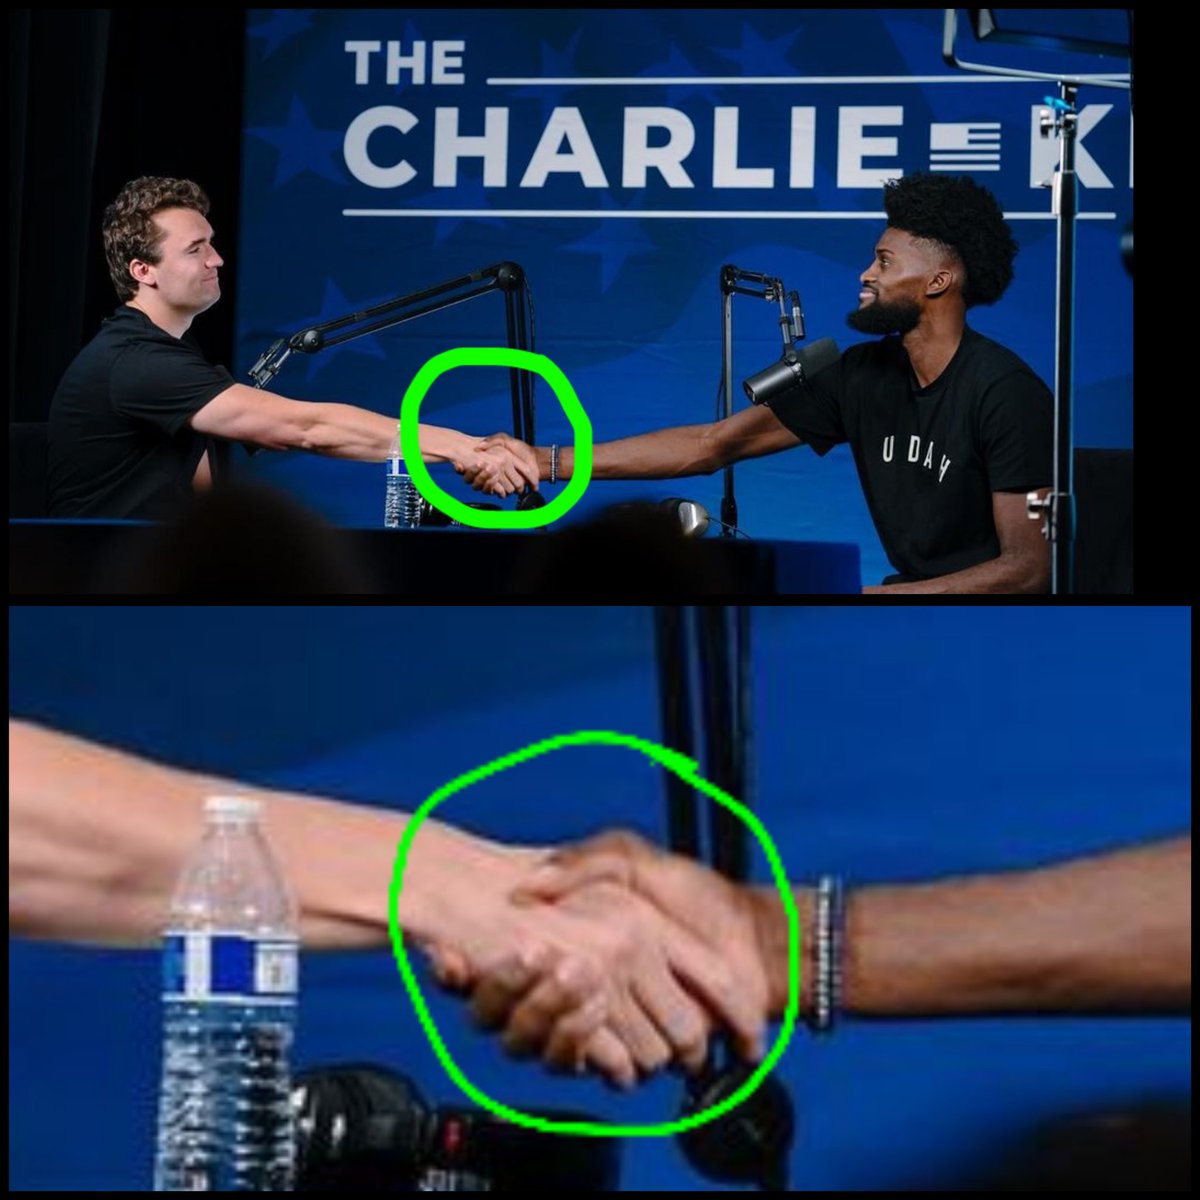 Can you see that this is 🚫 a regular handshake or are you under Charlie's spell? This is a freemason grip! 
#charliekirk #freemasonry #turningpointusa #Conservativeparty #ConservativeLies